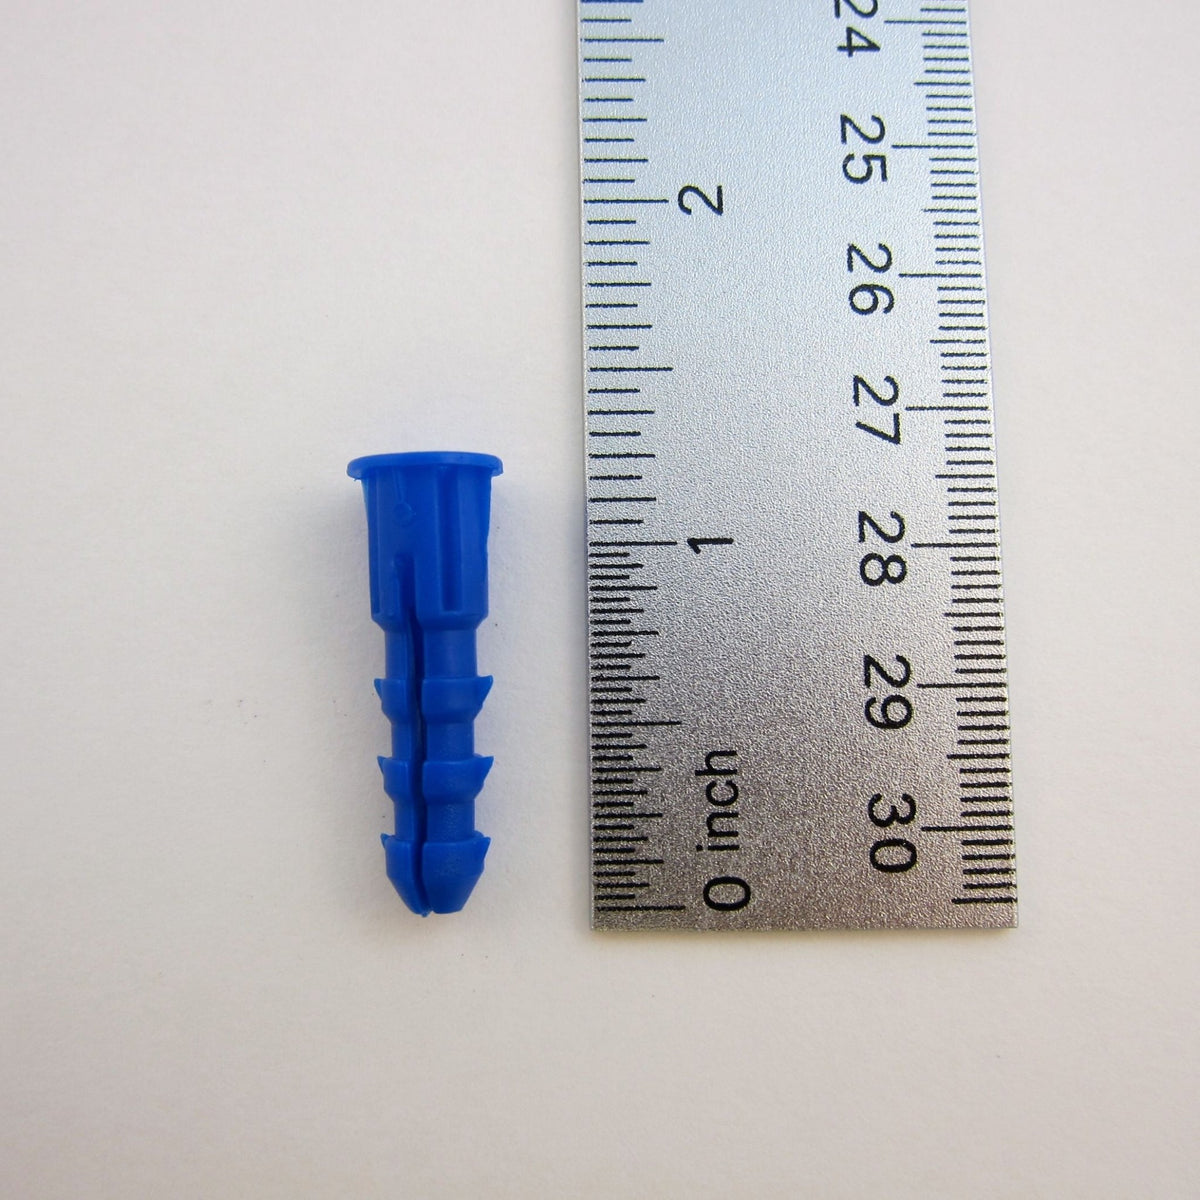 #14-16 Plastic Anchor - Blue - Security Screw Anchor - SC-ASECC - Picture Hang Solutions